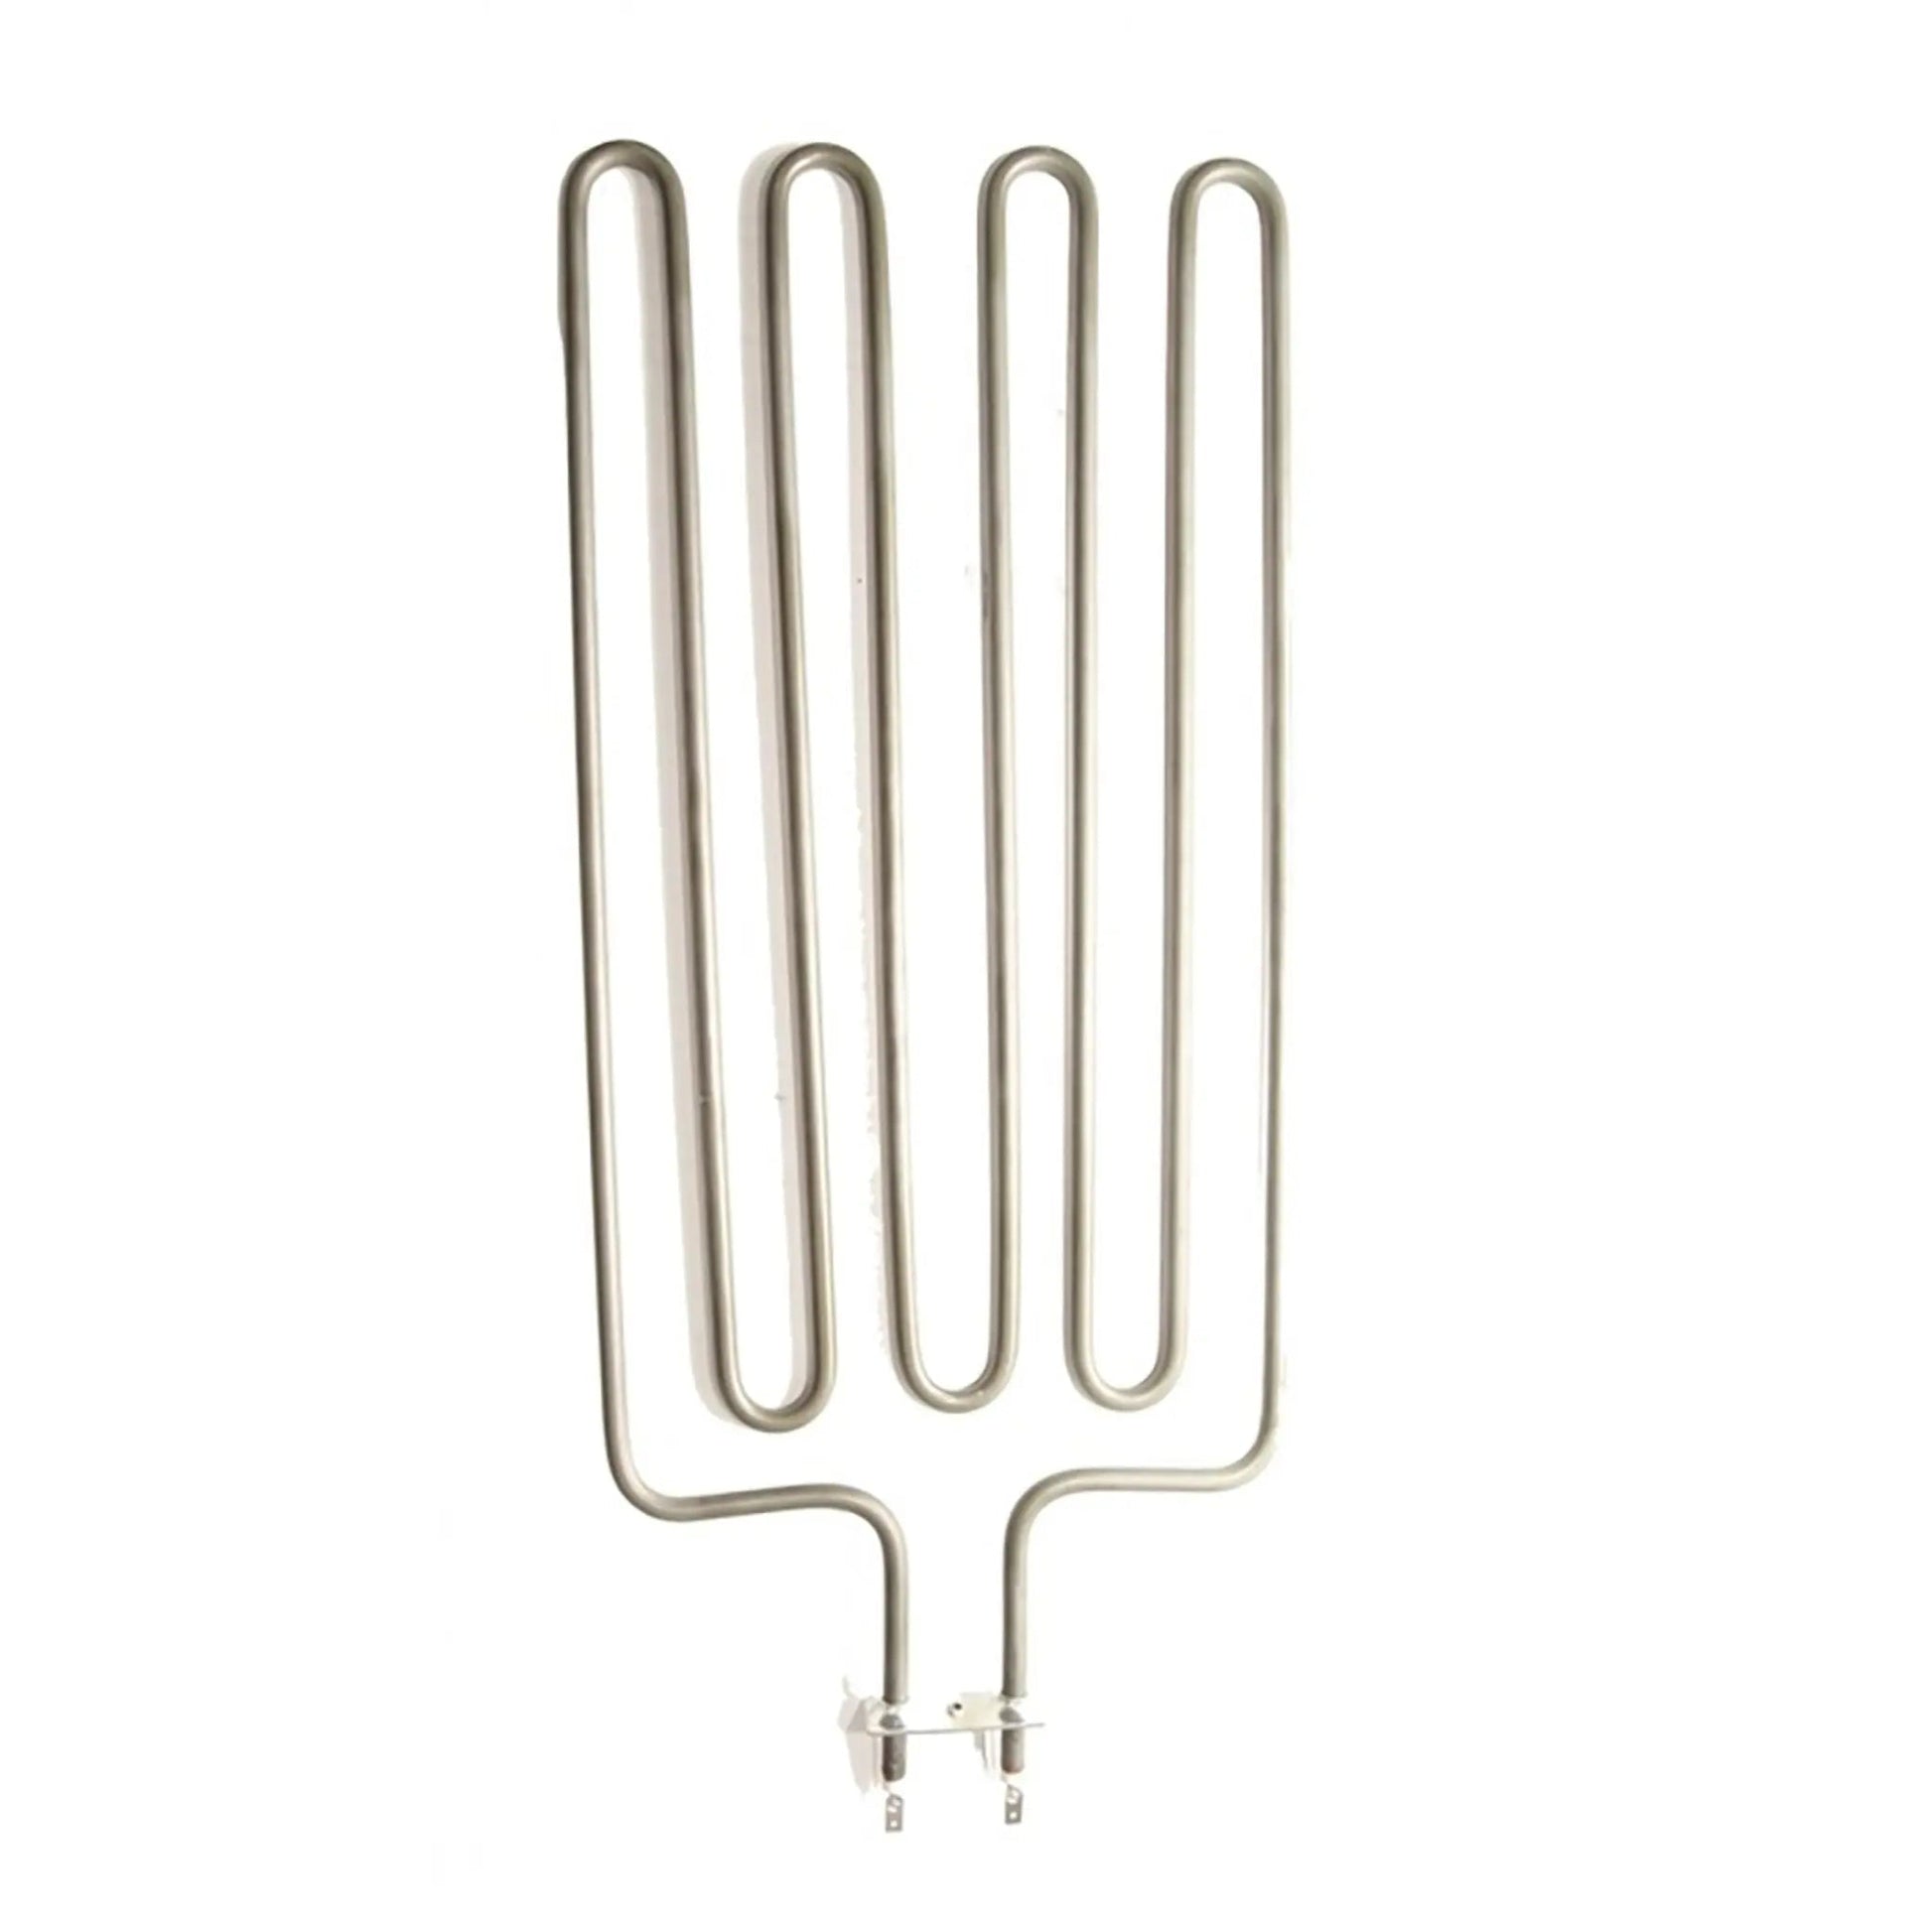 Narvi Electric Heater Replacement Element (3000w) for Stonet Heater Heating Element | Finnmark Sauna